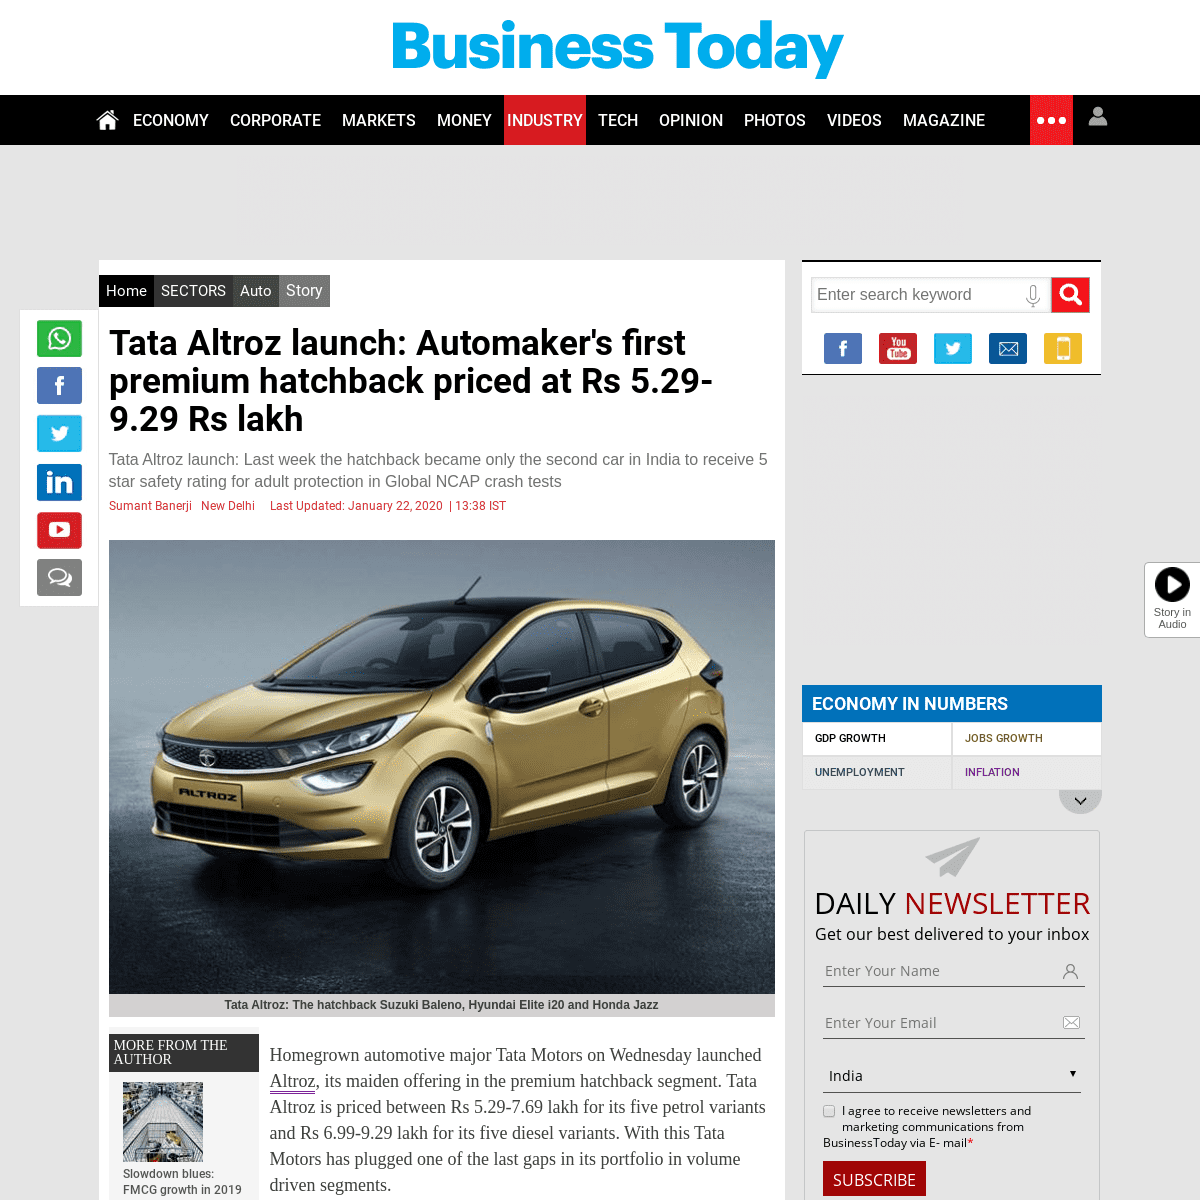 A complete backup of www.businesstoday.in/sectors/auto/tata-altroz-launch-automaker-first-premium-hatchback-priced-at-rs-5-29-9-